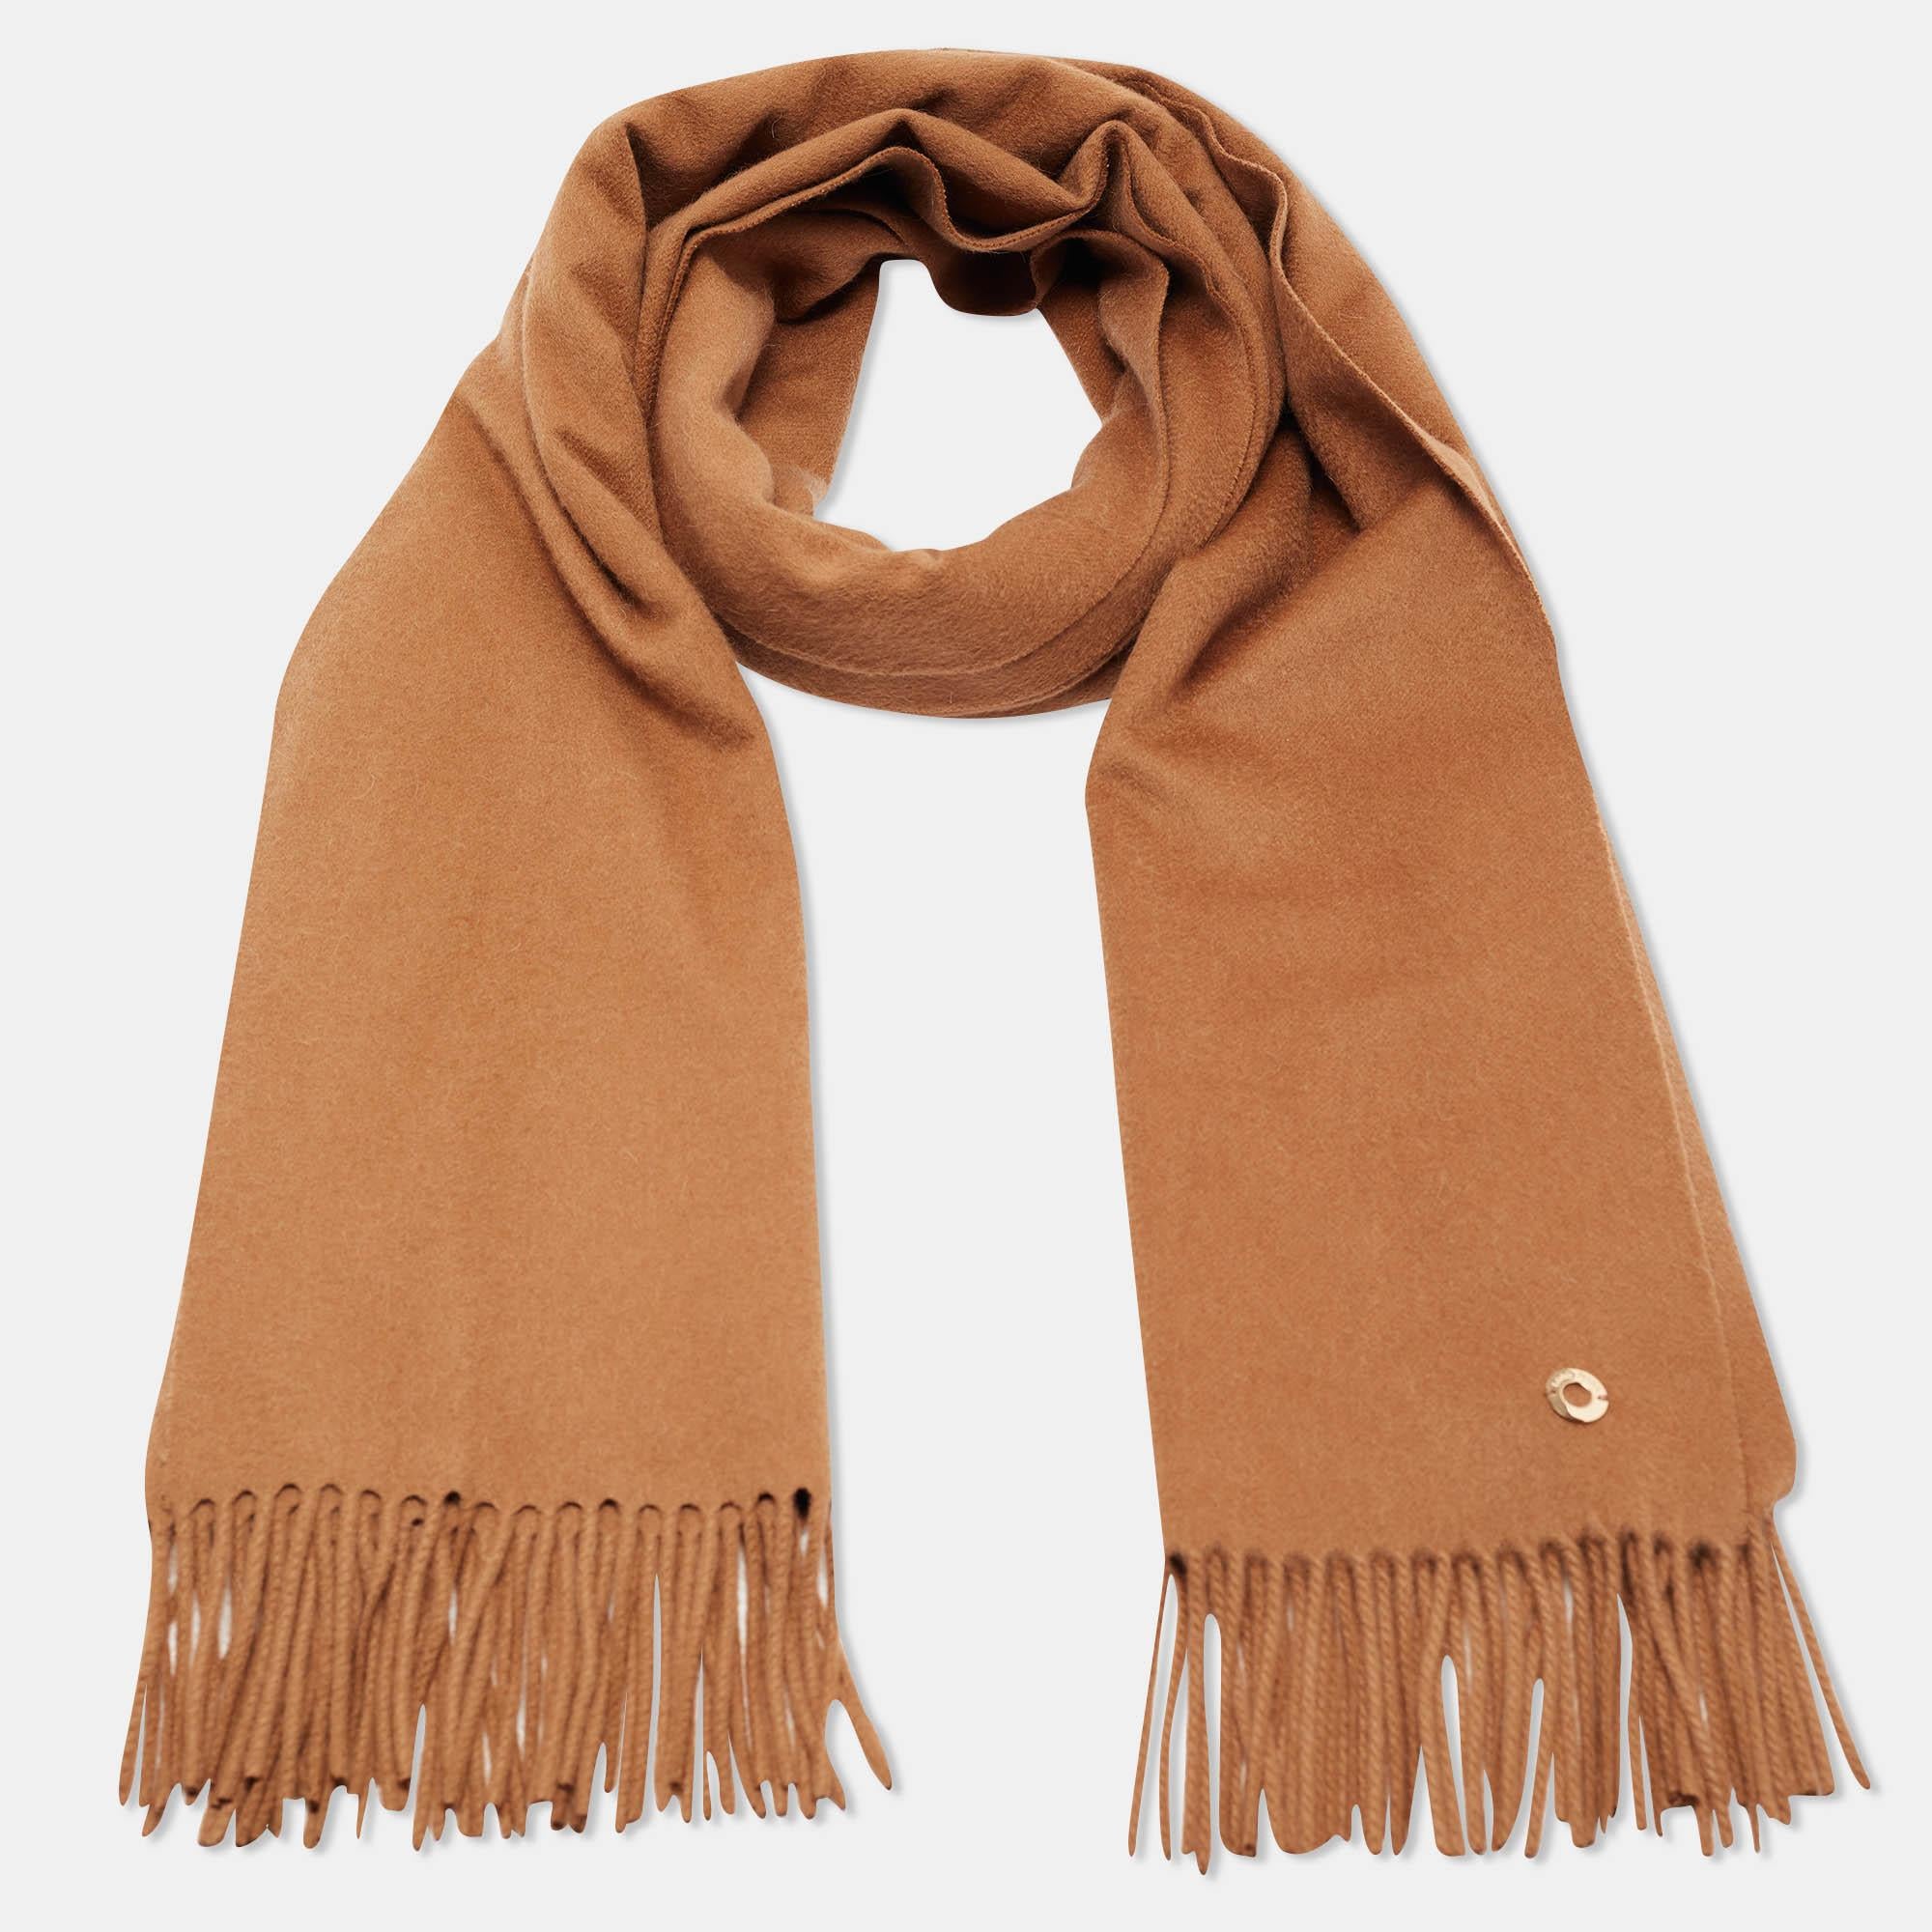 Crafted from the rare and exquisite Vicuña wool, the Loro Piana stole exudes unparalleled luxury. Its rich brown hue adds warmth and sophistication to any ensemble. Delicately woven with precision, it drapes effortlessly, enveloping the wearer in